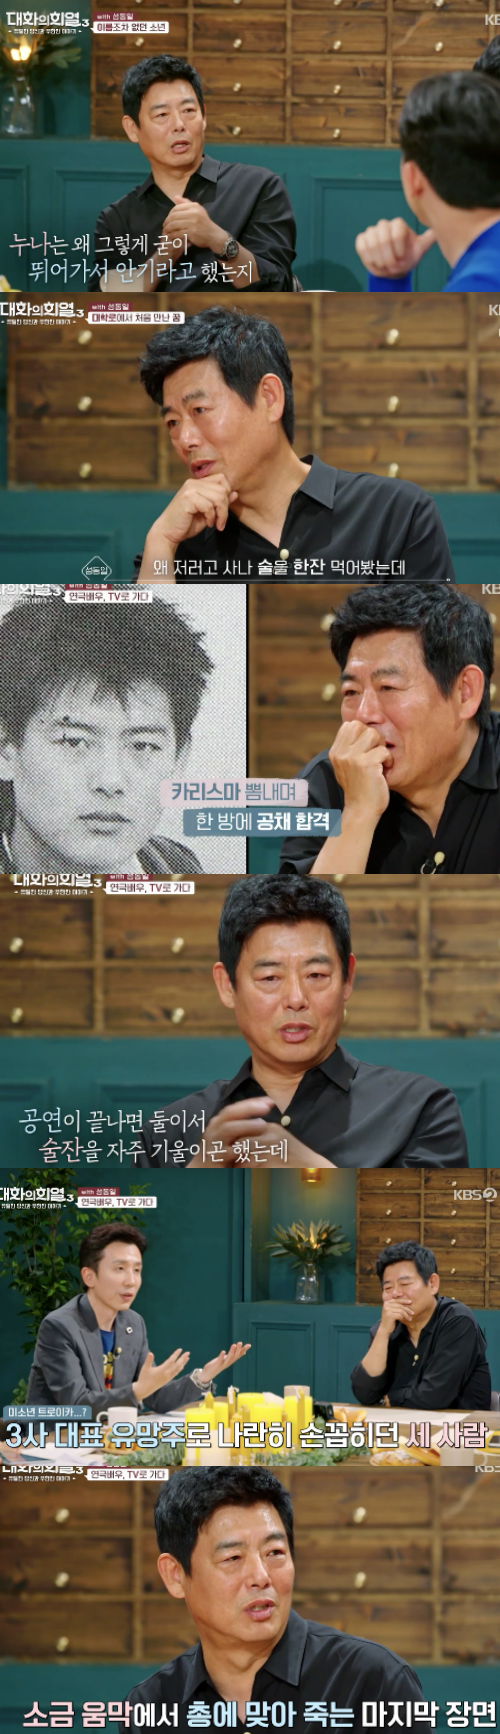 In the Delight of Dialogue 3, Sung Dong-il was shocked to confess that the total profit he earned for 10 years with Kim Young was 1.2 million won, following his heartbreaking childhood, where he lived without his name and family name for 10 years.The actor Sung Dong-il appeared on KBS 2TVs Hye-Yeol Season 3 of Dialogue broadcast on the 22nd.You Hee-yeol introduced Sung Dong-il, the 30th anniversary of his debut this year, saying, If you add up the play, you have postponed 40 years and a lifetime.When asked about his dreams during his school days, Sung Dong-il said, I was an adult, and said, It was a dream to live alone at home.Sung Dong-il, who was a boy who had no name in his adulthood, said, I did not even climb to my family, so I found my name until I was 10 years old in elementary school. I have never seen my father, the local adults called him Jonghoon, who built it,After that, I had to put it on my family register to enter the school, and I found my father who had broken up.One day, Im your father, my first father, my parents reunited that day, put it on my family register, and went to school, Sung Dong-il recalled.But it was worse between my parents.Sung Dong-il said, I did not want to blame my parents, but rather I wanted to have their bad relationship because of me.Sung Dong-il said, My mother has been living in the streets for a lifetime, and my mother who could not afford to take care of her child, and I did not talk about going to school.When my mother made a single decision, she told me to pick out what I wanted to buy one day, Sung Dong-il said. My mother told me how to leave you when she saw me choosing a bowl of rice in my sportswear, and my mother did not give up her life.He then made his debut as a SBS bond talent in 1991, and his move to TV was because he did not want to suffer his mother anymore.Sung Dong-il, who lived as Kim Young at the time, was shocked by the fact that the total income for 10 years was 1.2 million won.All of them said, Lee Jung-eun was an actor with an annual salary of 200,000 won, but now he has earned a lot.In addition, he had a hard time for another 10 years, he had to eat and live.I am an actor, but entertainment is not an atmosphere because of my pride, he said. Now was the time to appear in entertainment, but it was time to keep my pride.So, Sung Dong-il, whose acting skills were full in the work Chuno, was praised as Sung Dong-il.But when you humbly answered that you did not come out much, You Hee-yeol recalled a person named Chun Ji-ho who was all in the memory, saying, The presence is a main character-class new styler.Sung Dong-il said, I am a little different from the concept, I want to be a good father, but the answer is clear. If I live against my father, I am a good father, a good husband.I think you gave me good teachings that you dont have to pass on great property, I think youre positive, I always feel like a father, I just want to live on the other hand, I just want to live on the other hand, Sung Dong-il said.I was told that my father had gone to the funeral, but I didnt go to the funeral, he said, recalling the day his father died. I later found out that my wife had secretly visited before my father died and showed me the young June and Bin, and my wife first introduced her grandchildren and died a few days later.Sung Dong-il said, My wife has been holding a sacrifice for our fathers sacrifice since then, and we have been holding a sacrifice so far. There is nothing to beat my wife. You Hee-yeol was impressed.Sung Dong-il recalled the first rice soup house that met his wife and said, I could not have a wedding ceremony for everyone. Thank you to my wife who made a good family healthy and healthy for all three children.Finally, when asked about the happiest moment for Sung Dong-il, he said, I am the happiest person to go home after shooting and see my children and wife sleeping, he said.The Joy of Dialogue 3 broadcast screen capture